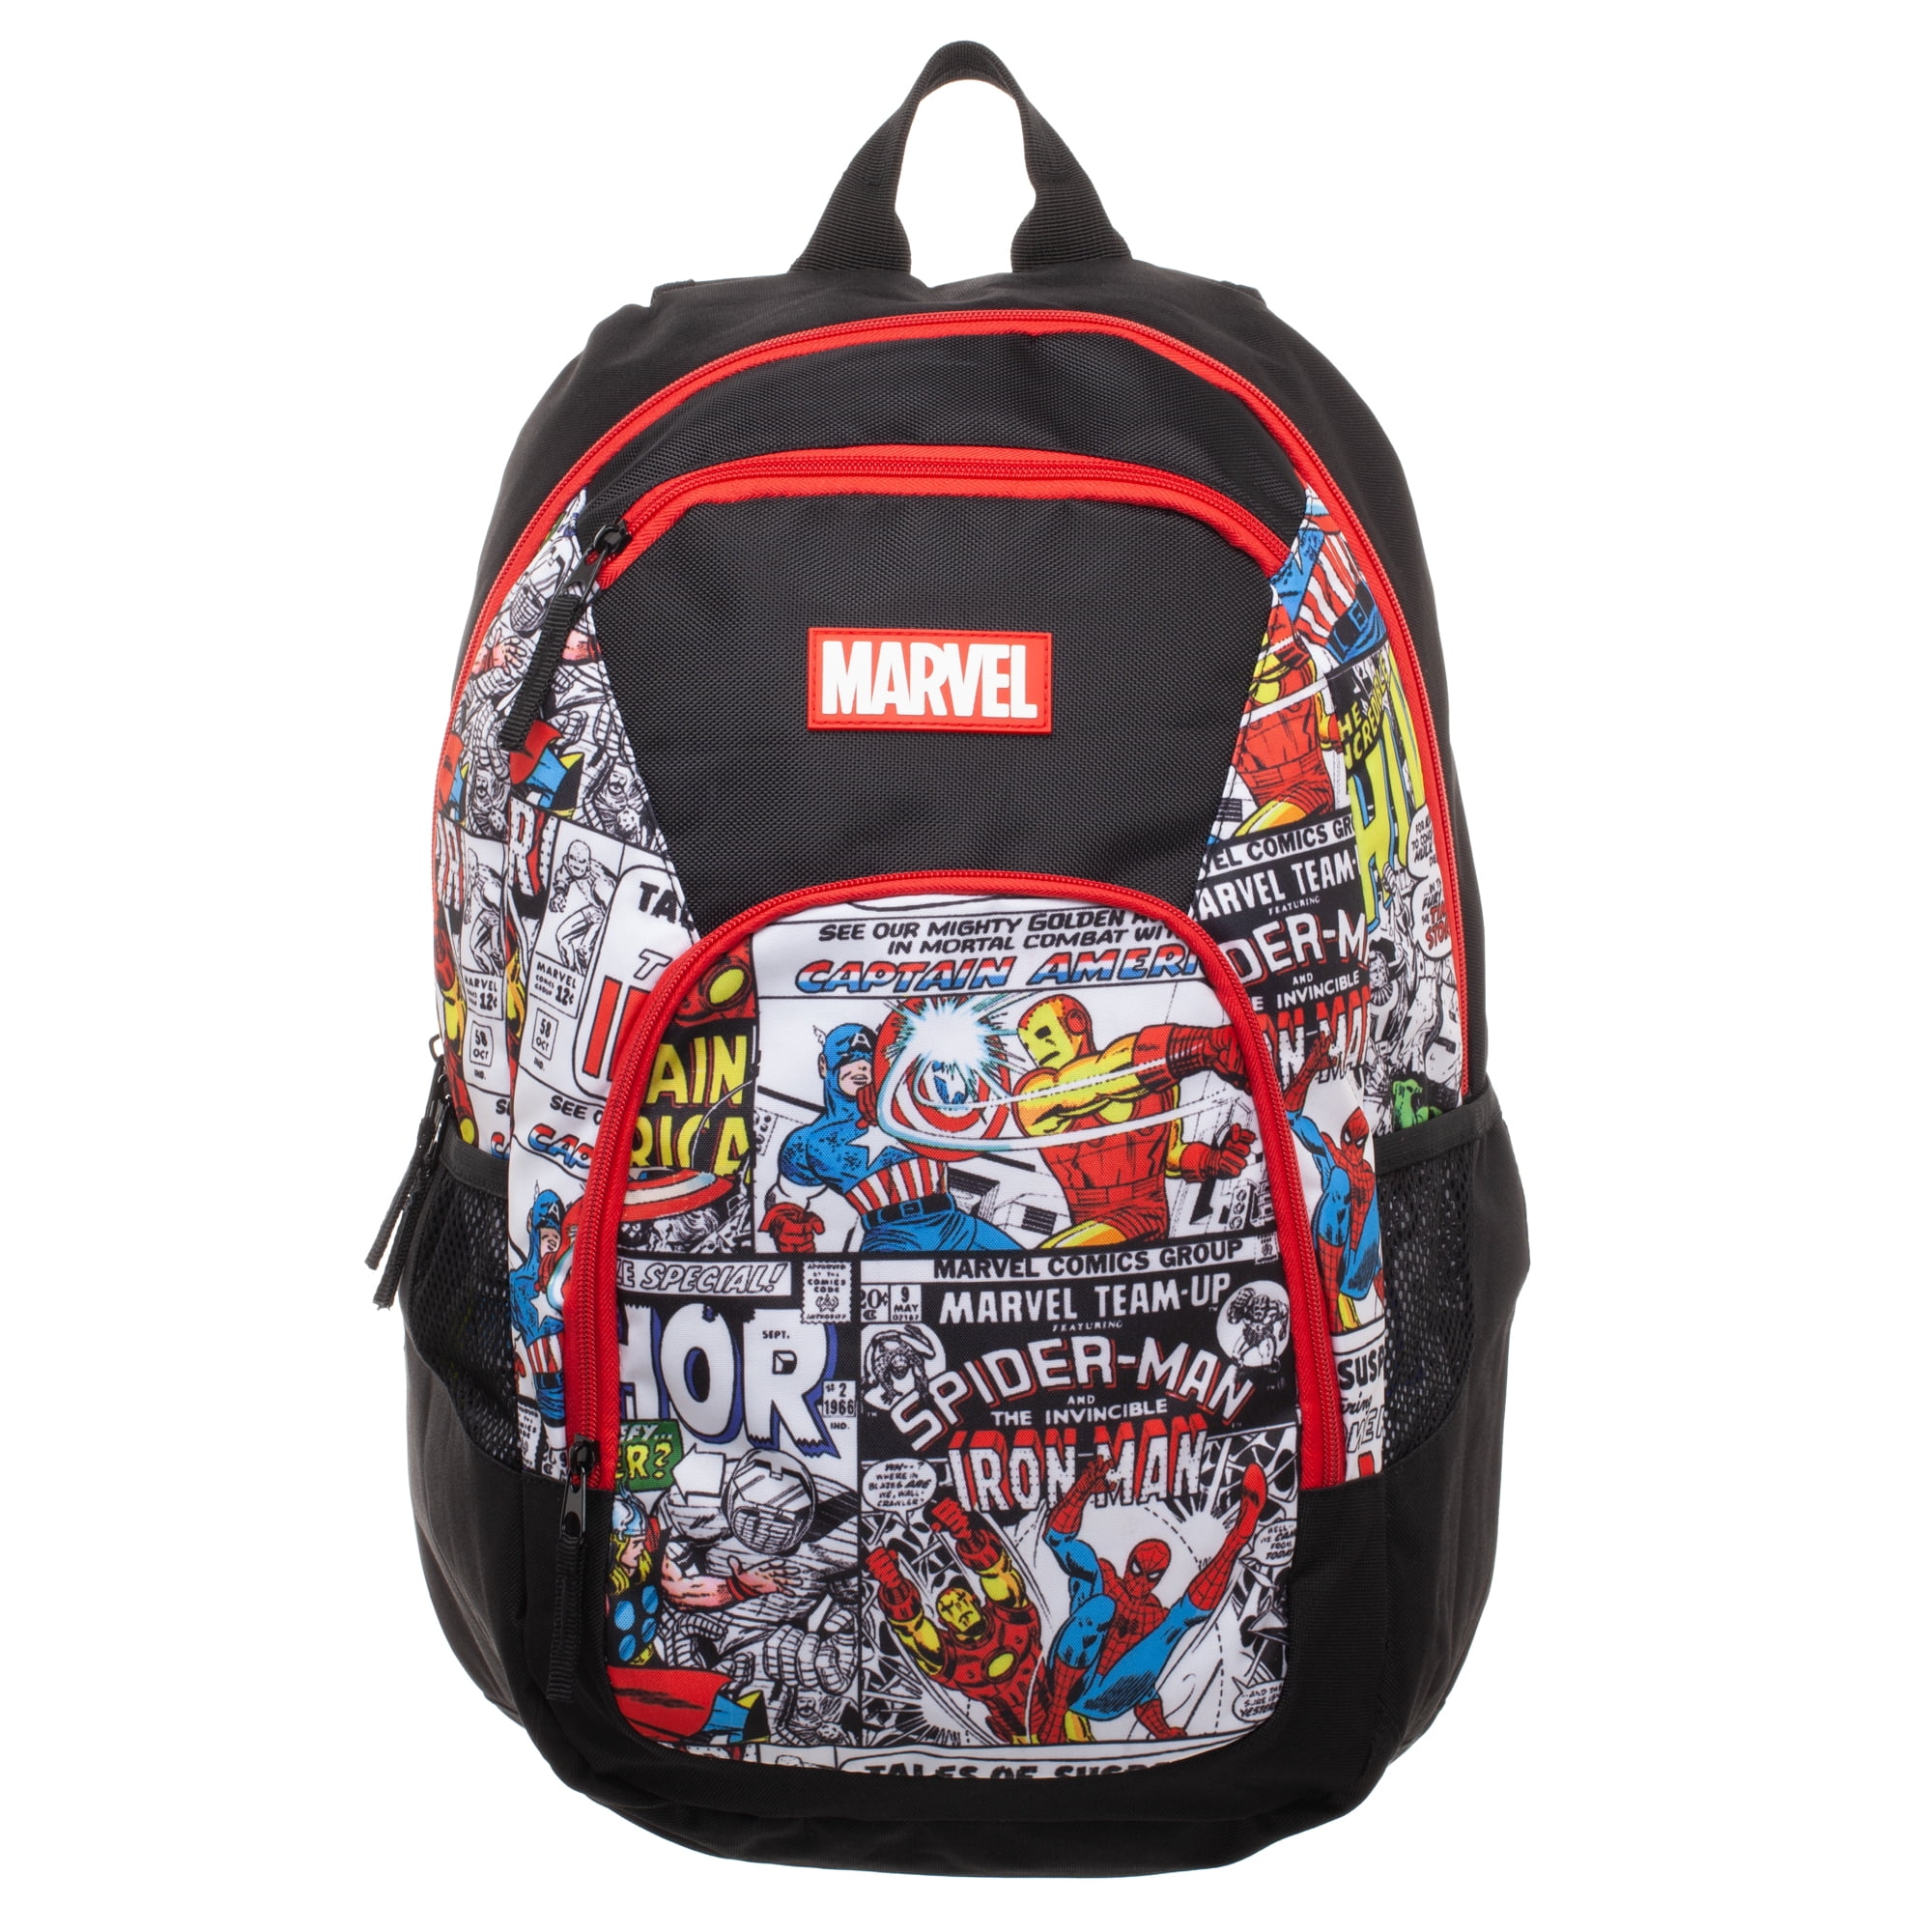 Marvel Classic Marvel Comics 18" Backpack with Laptop